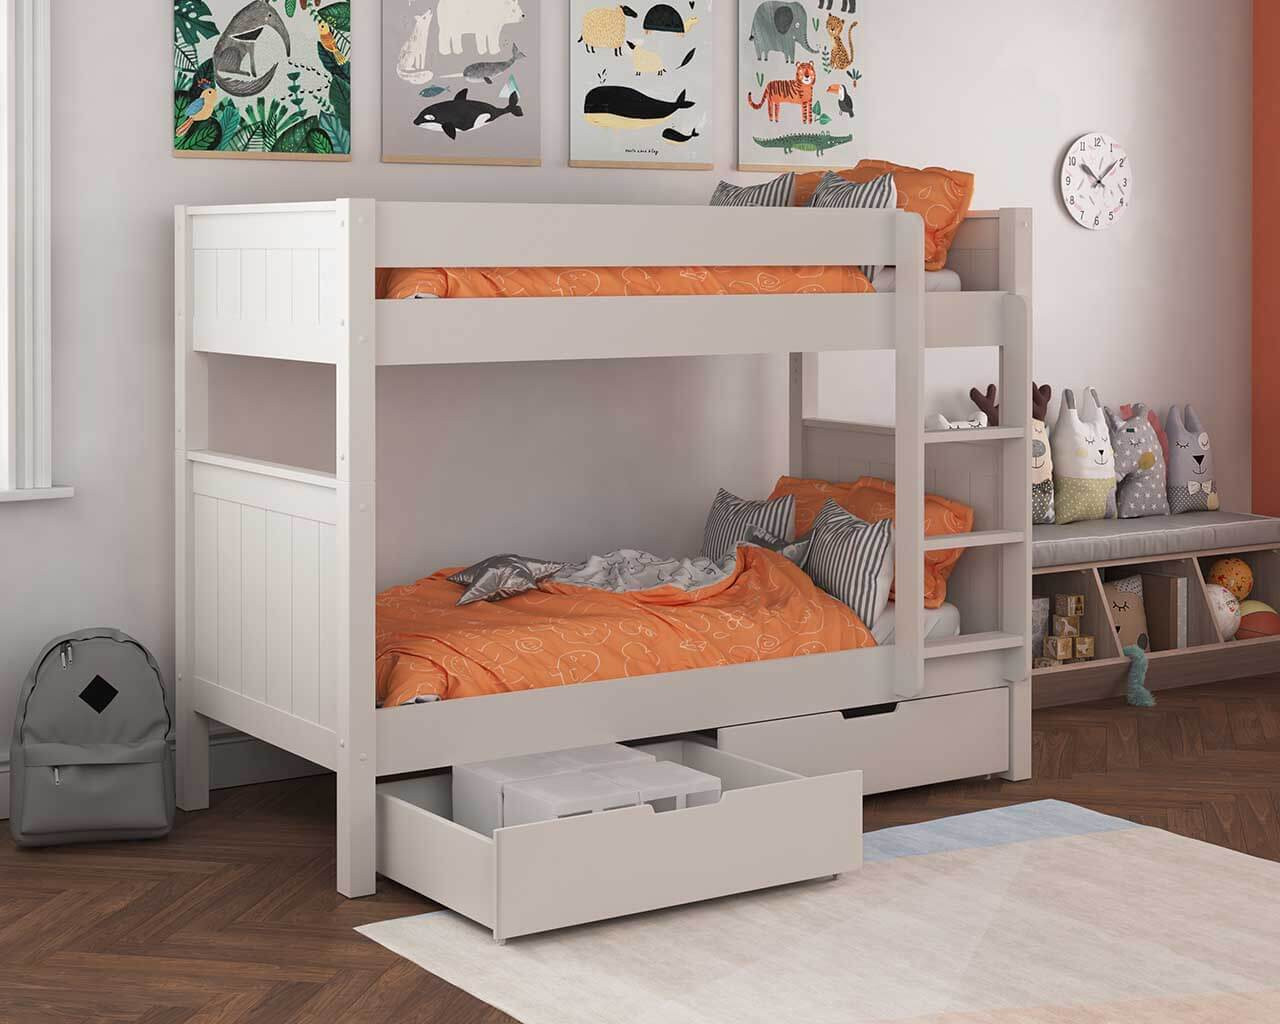 Stompa classic bunk bed with underbed drawers